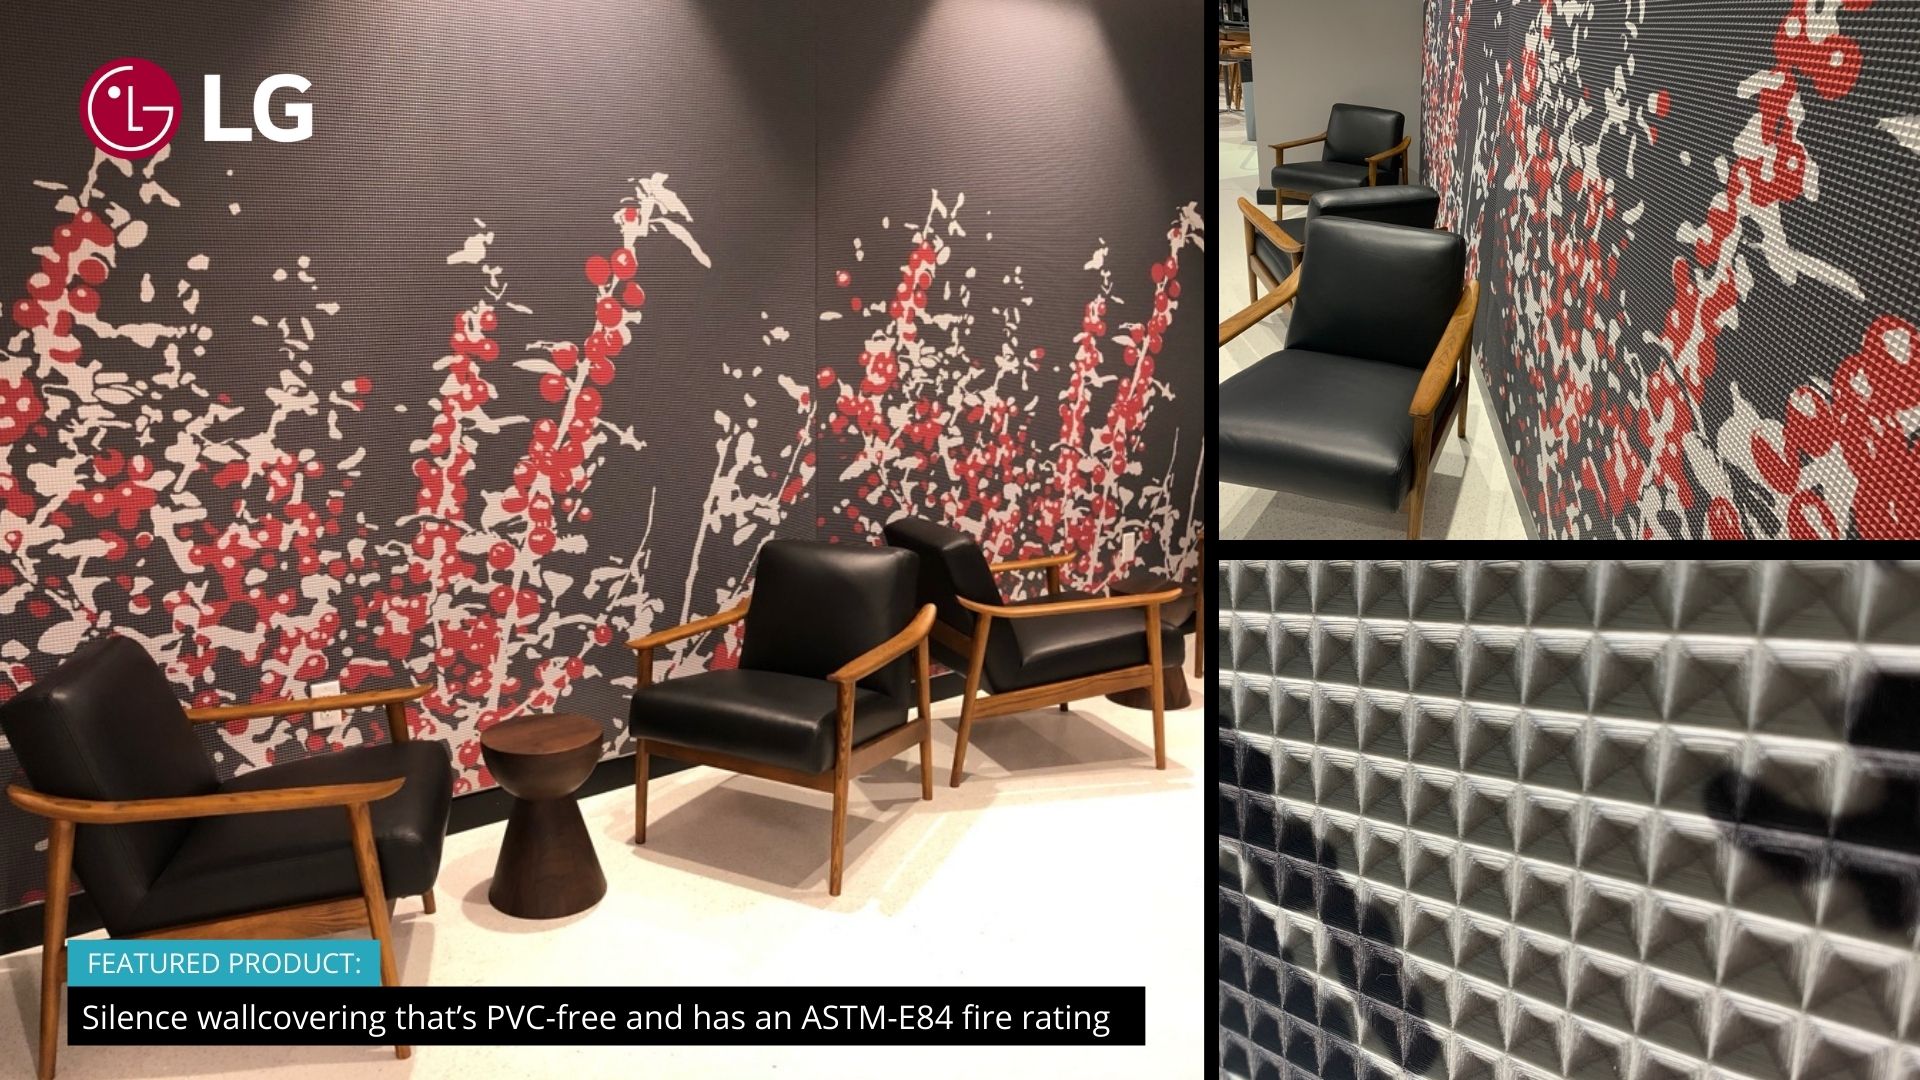 Photo of LG's corporate office where there is a wall with black, red, and white floral wallpaper made of texturized sound dampening modular material – as well as groupings of chairs and round tables